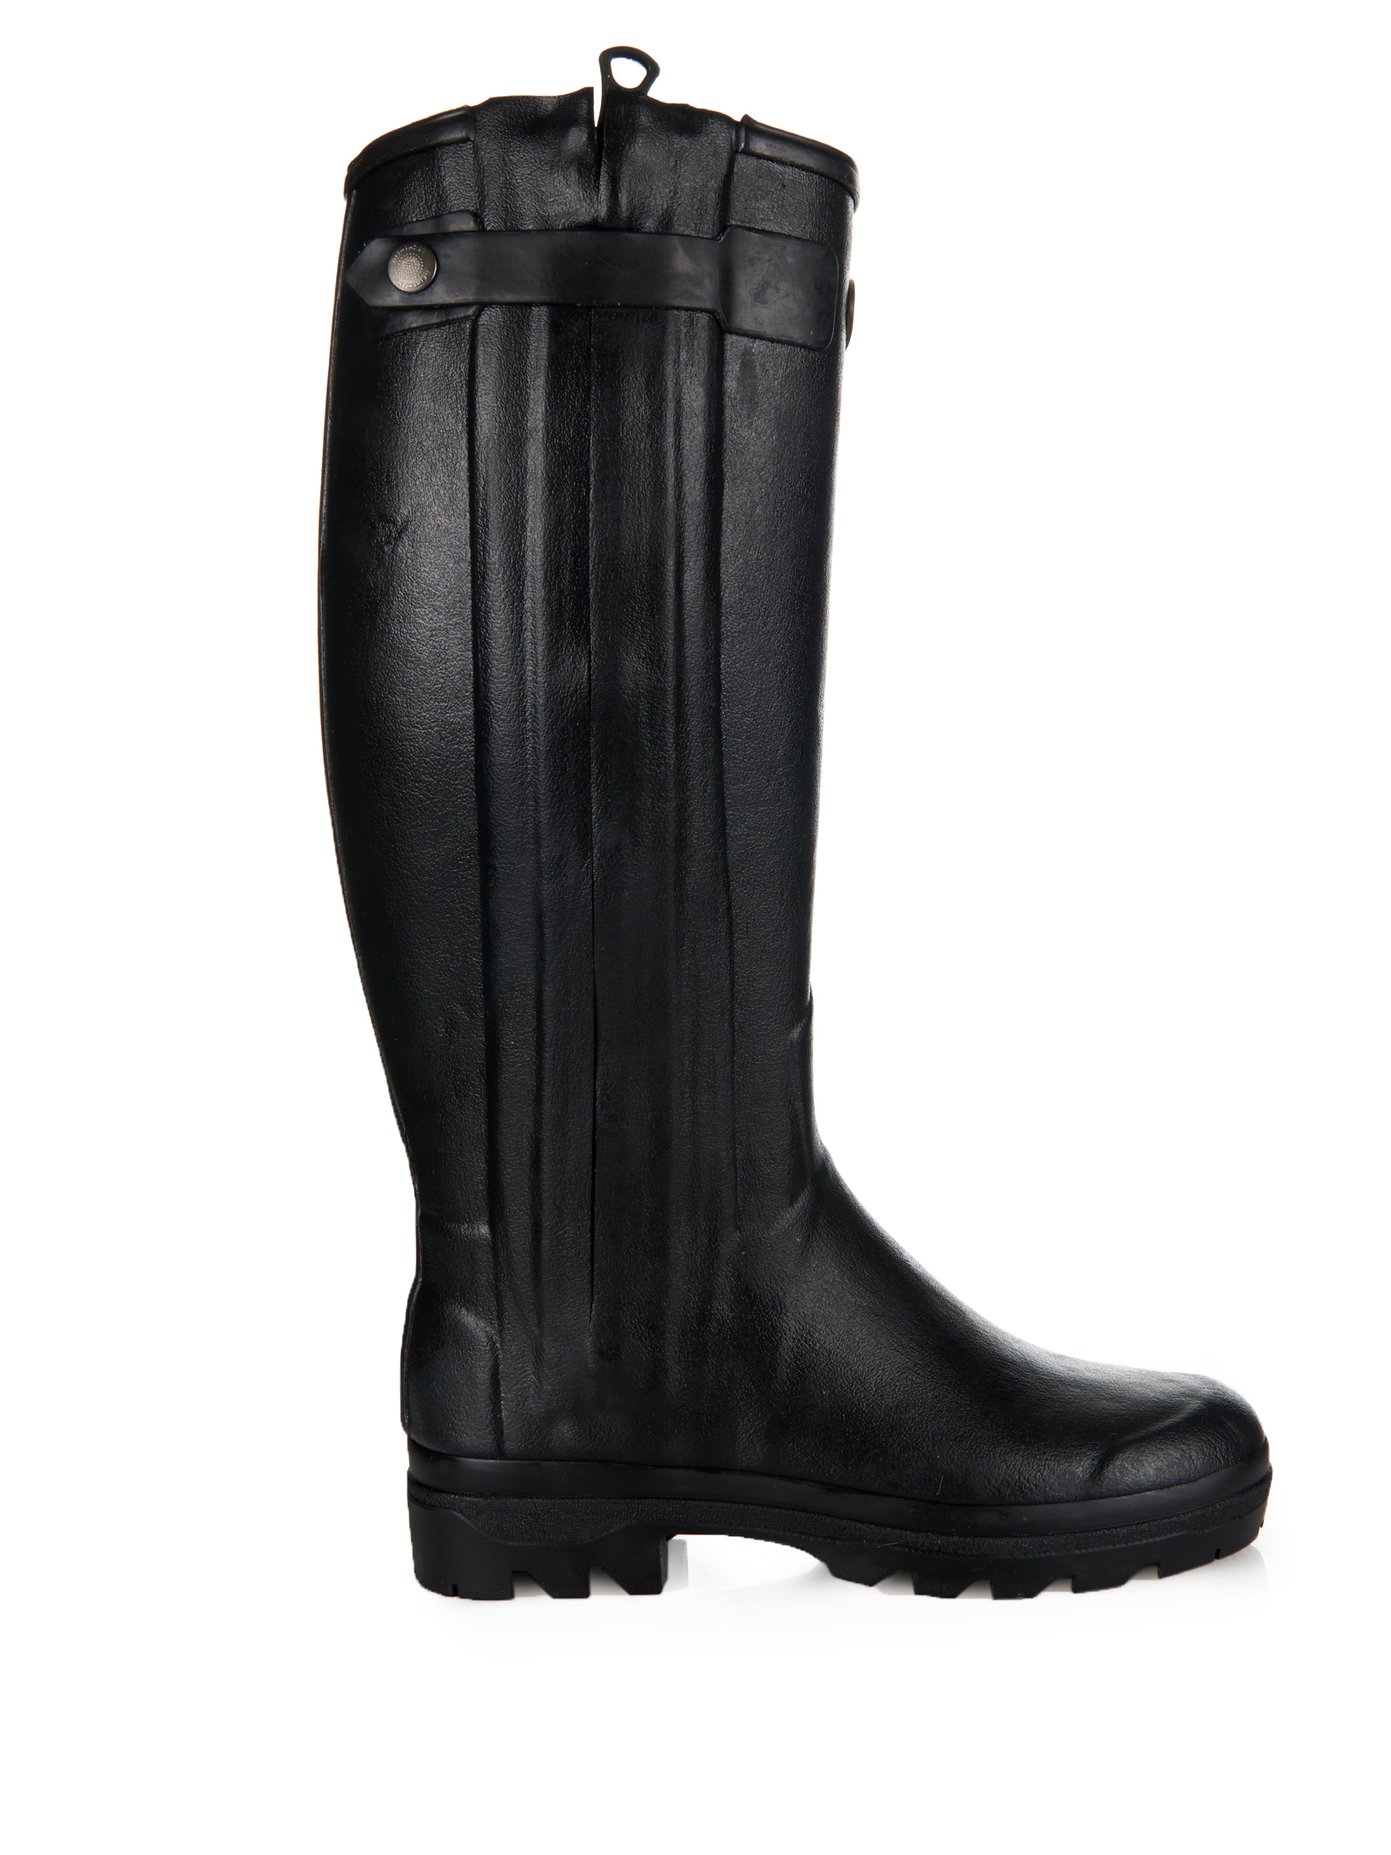 Chasseur rubber and leather boots | Le 